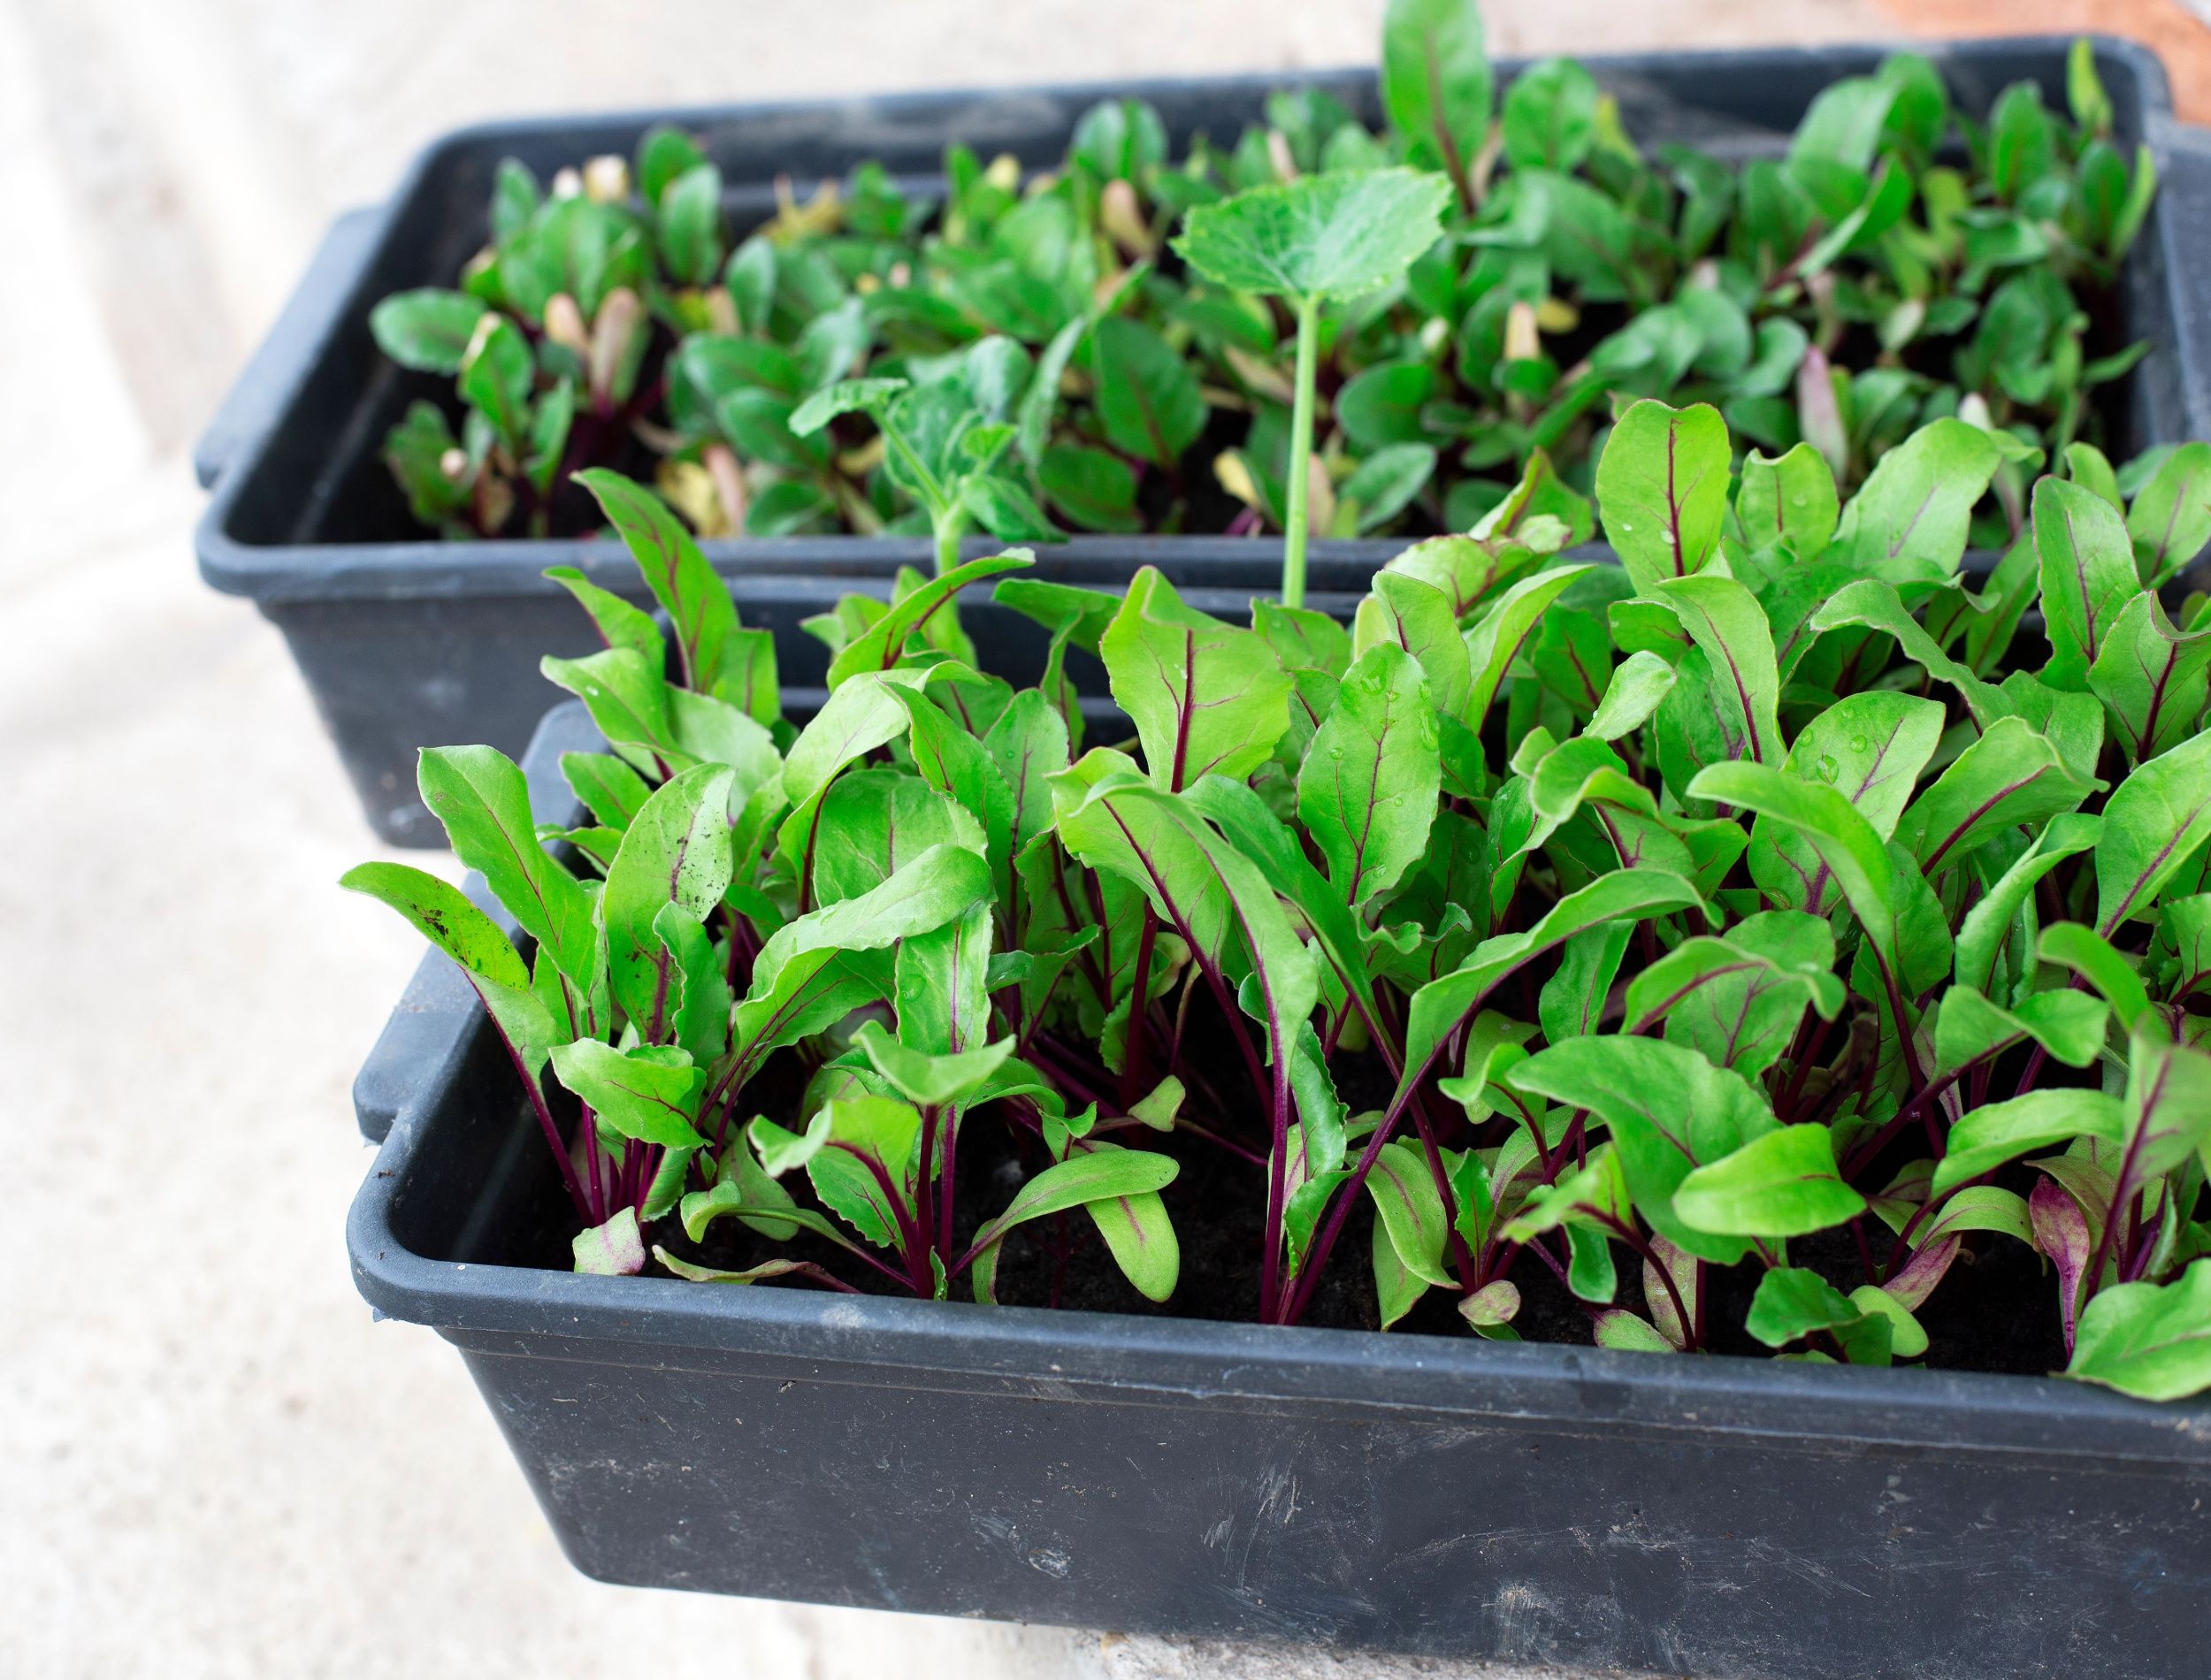 sprouting beets growing in containers